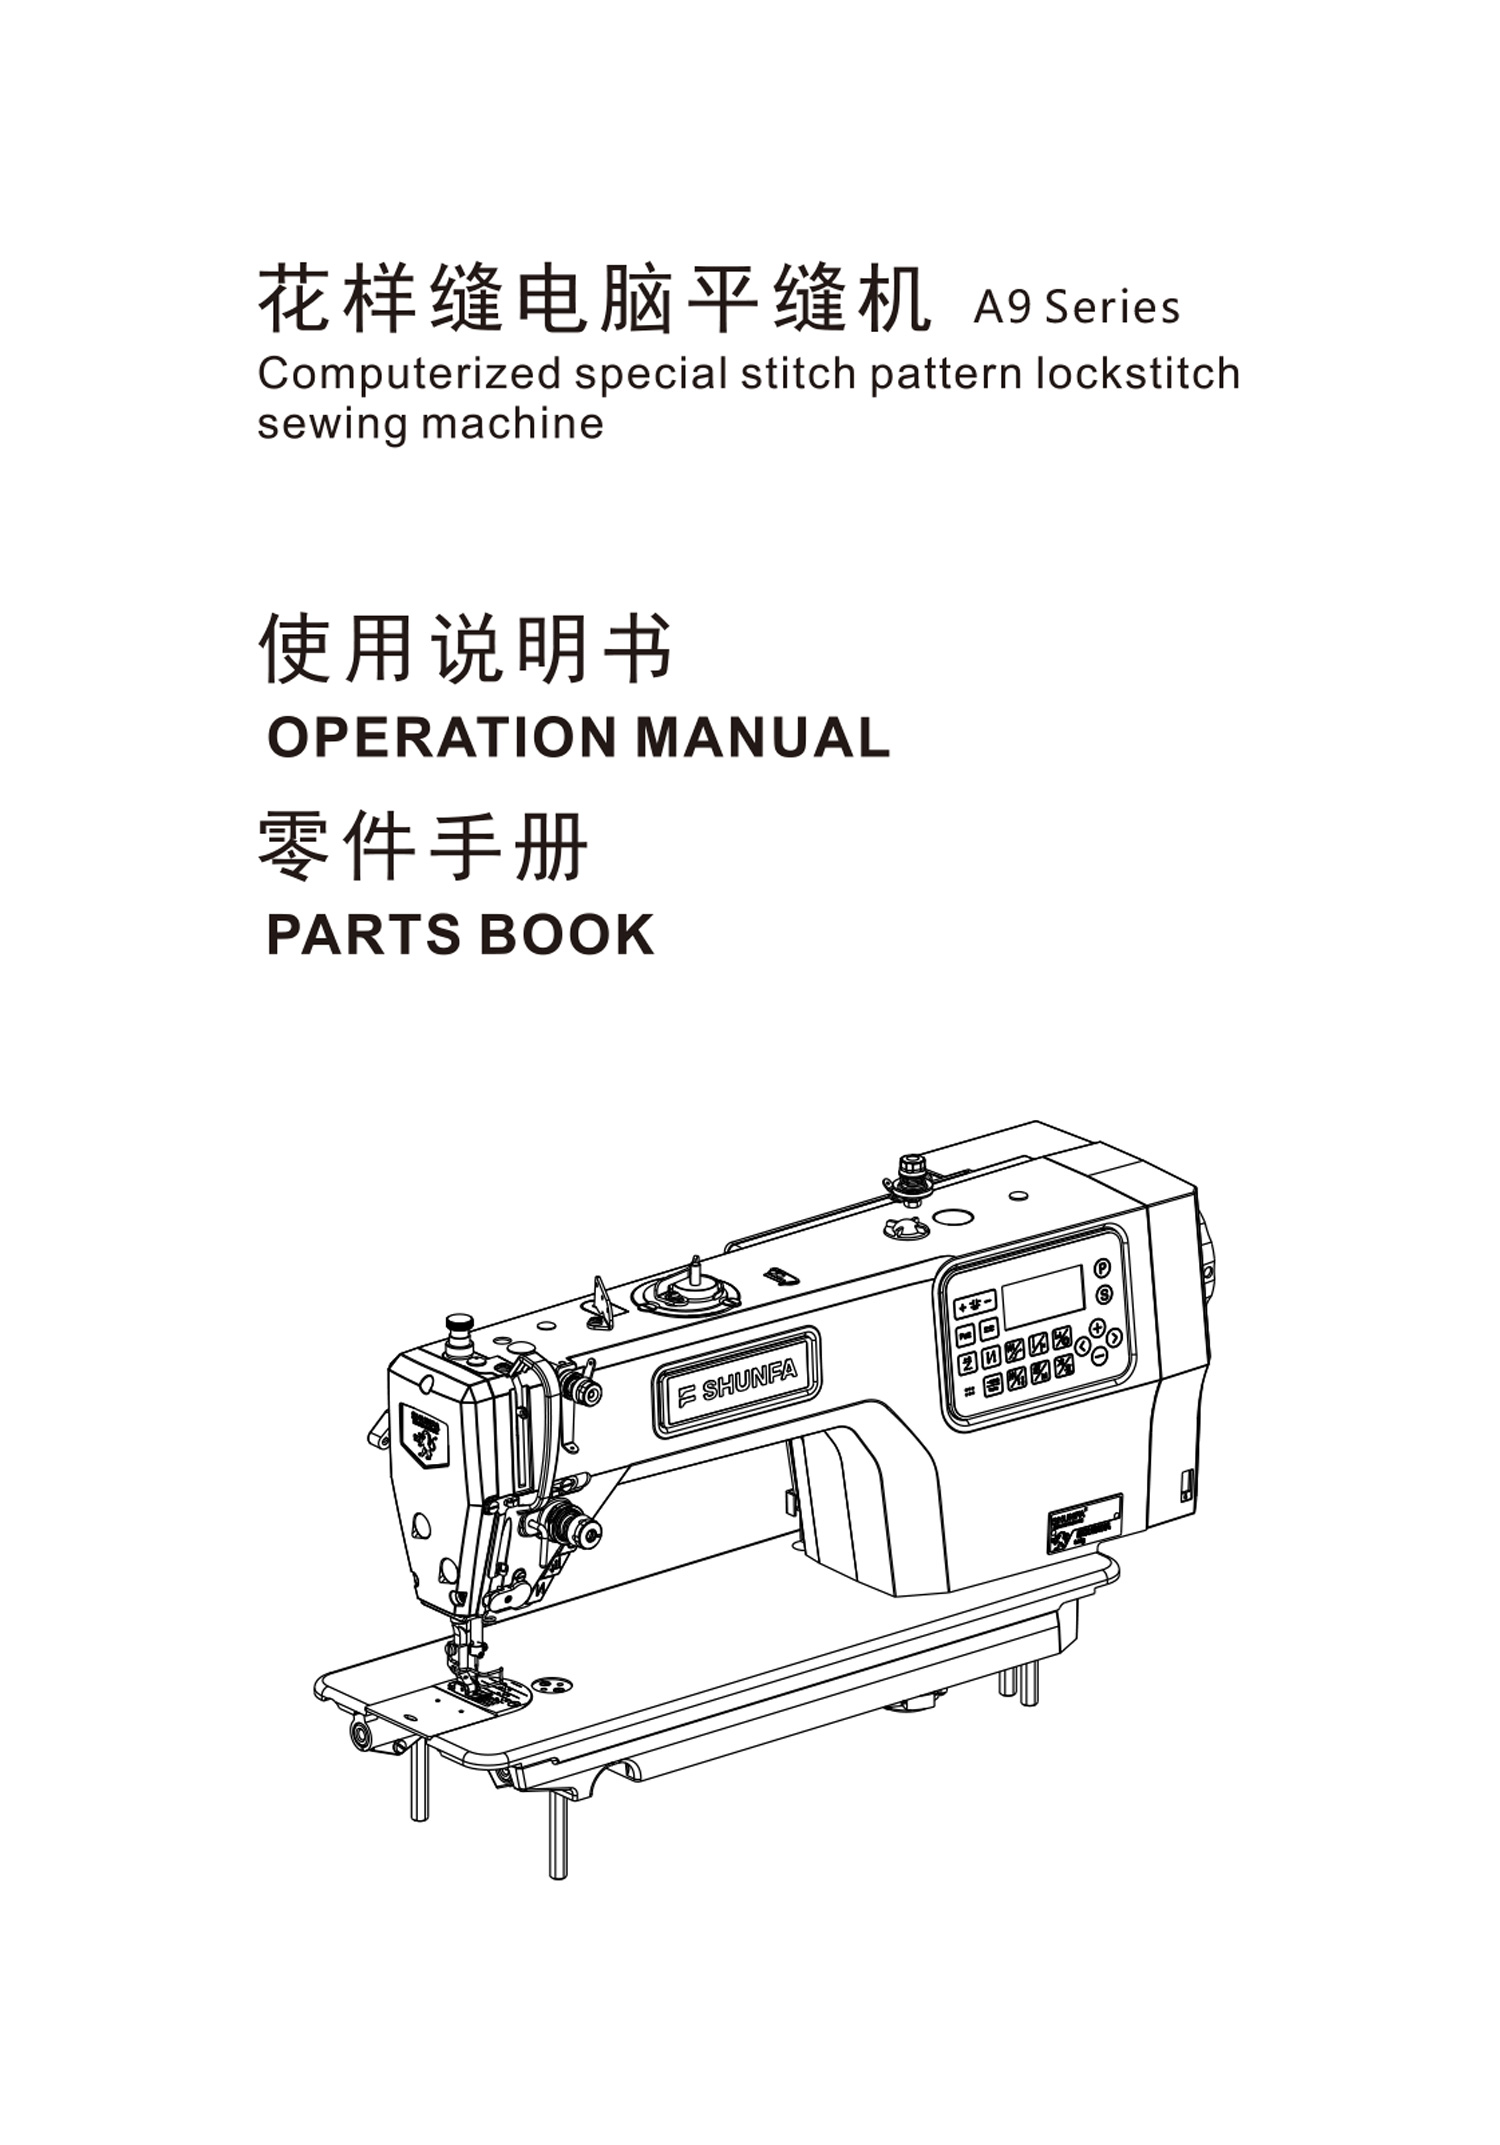 Upgraded single-step-motor-drive lockstitch sewing machine (suitable for different type of fabric,large operation space)